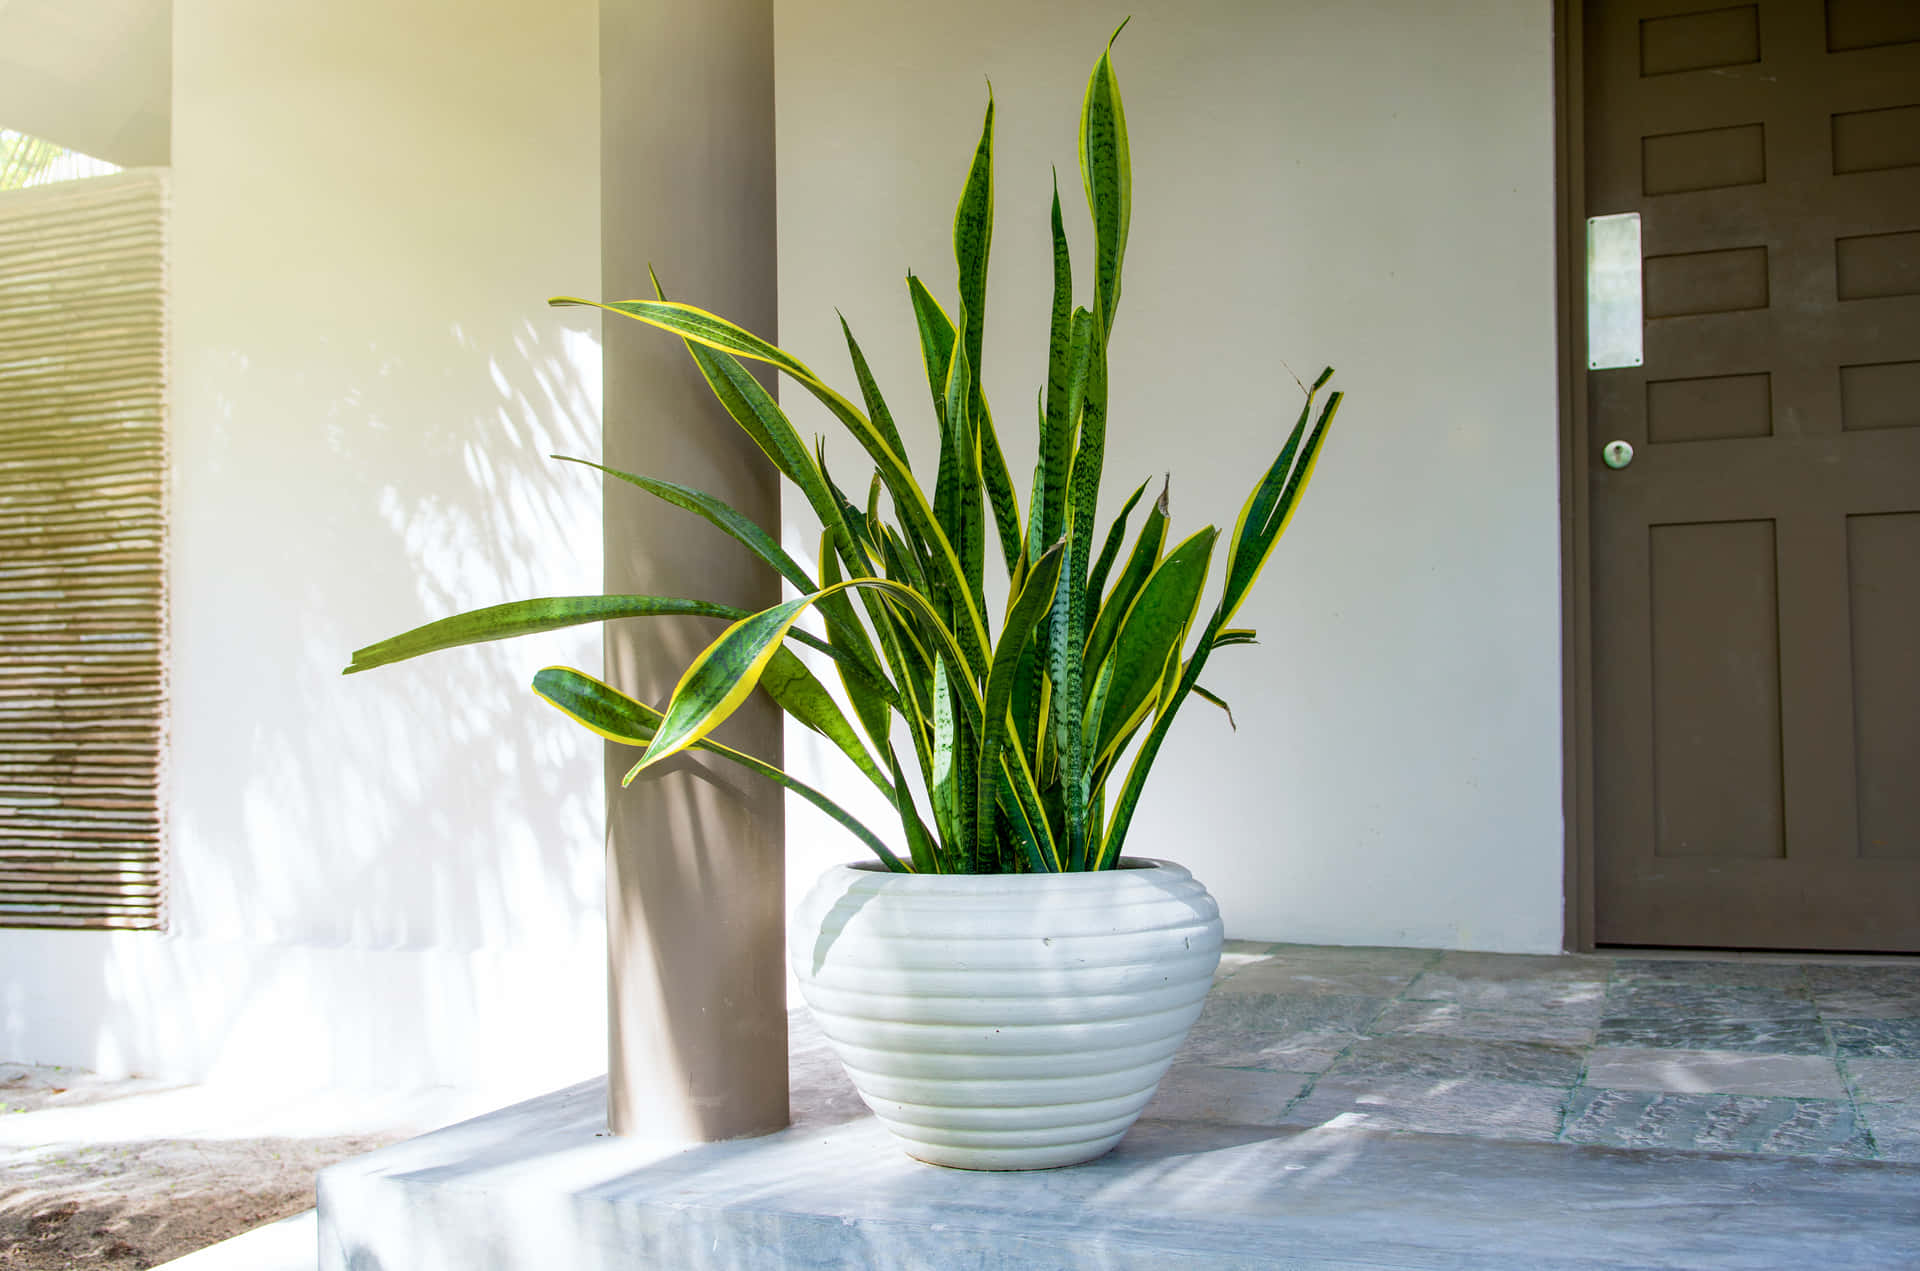 Add Some Green to Your Space With Snake Plants